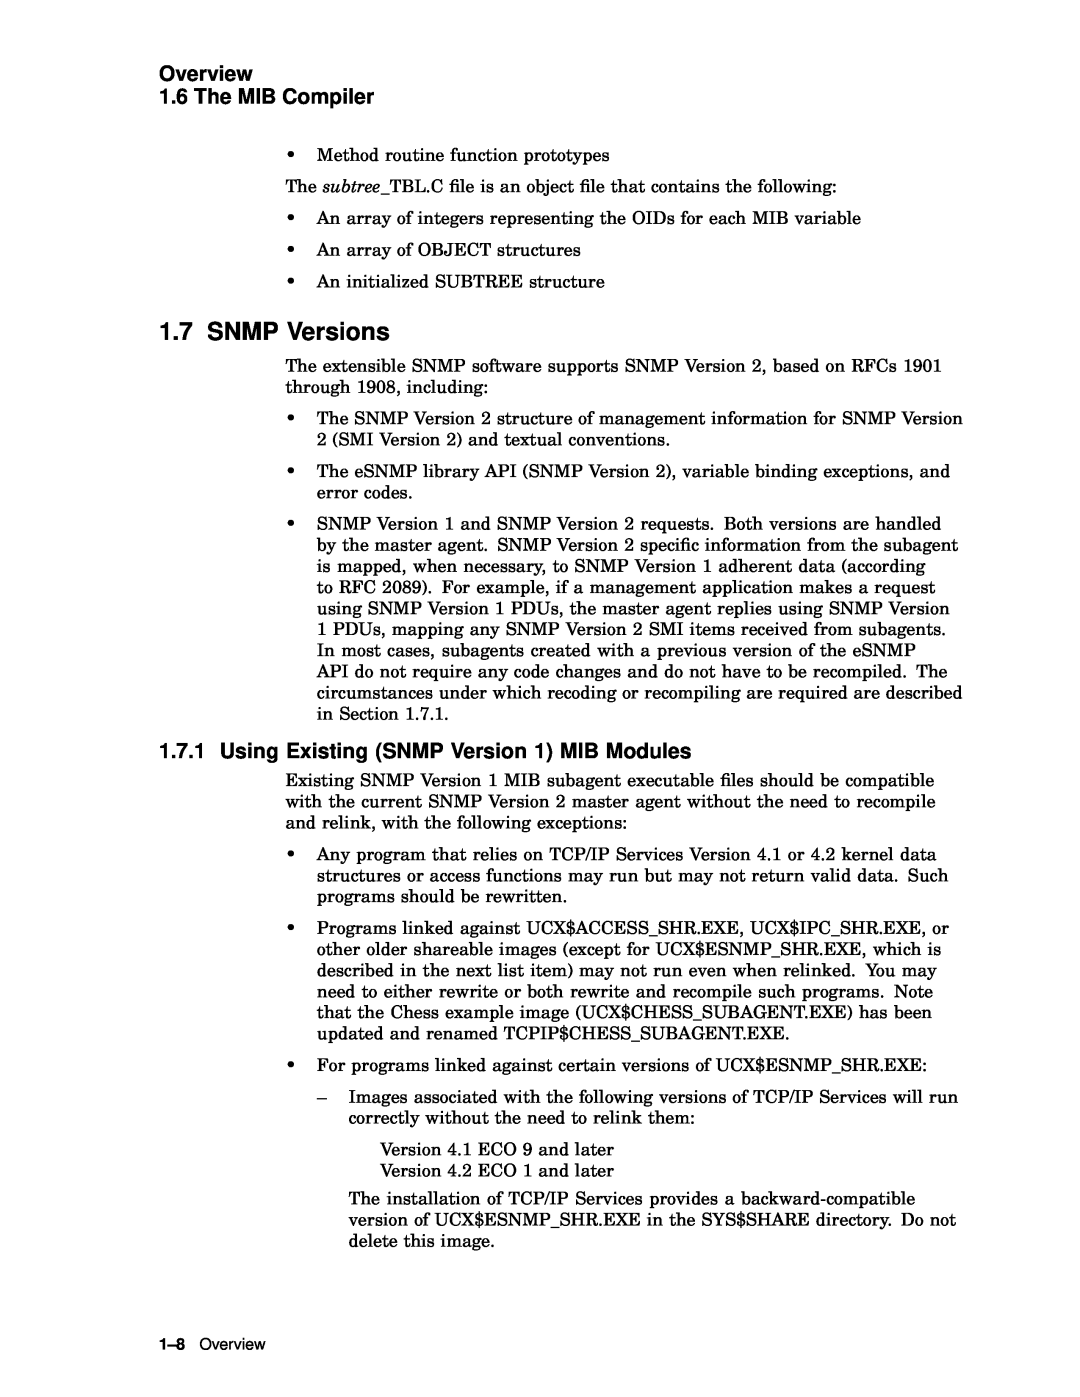 Compaq AAR04BCTE manual SNMP Versions, Overview 1.6 The MIB Compiler, Using Existing SNMP Version 1 MIB Modules 